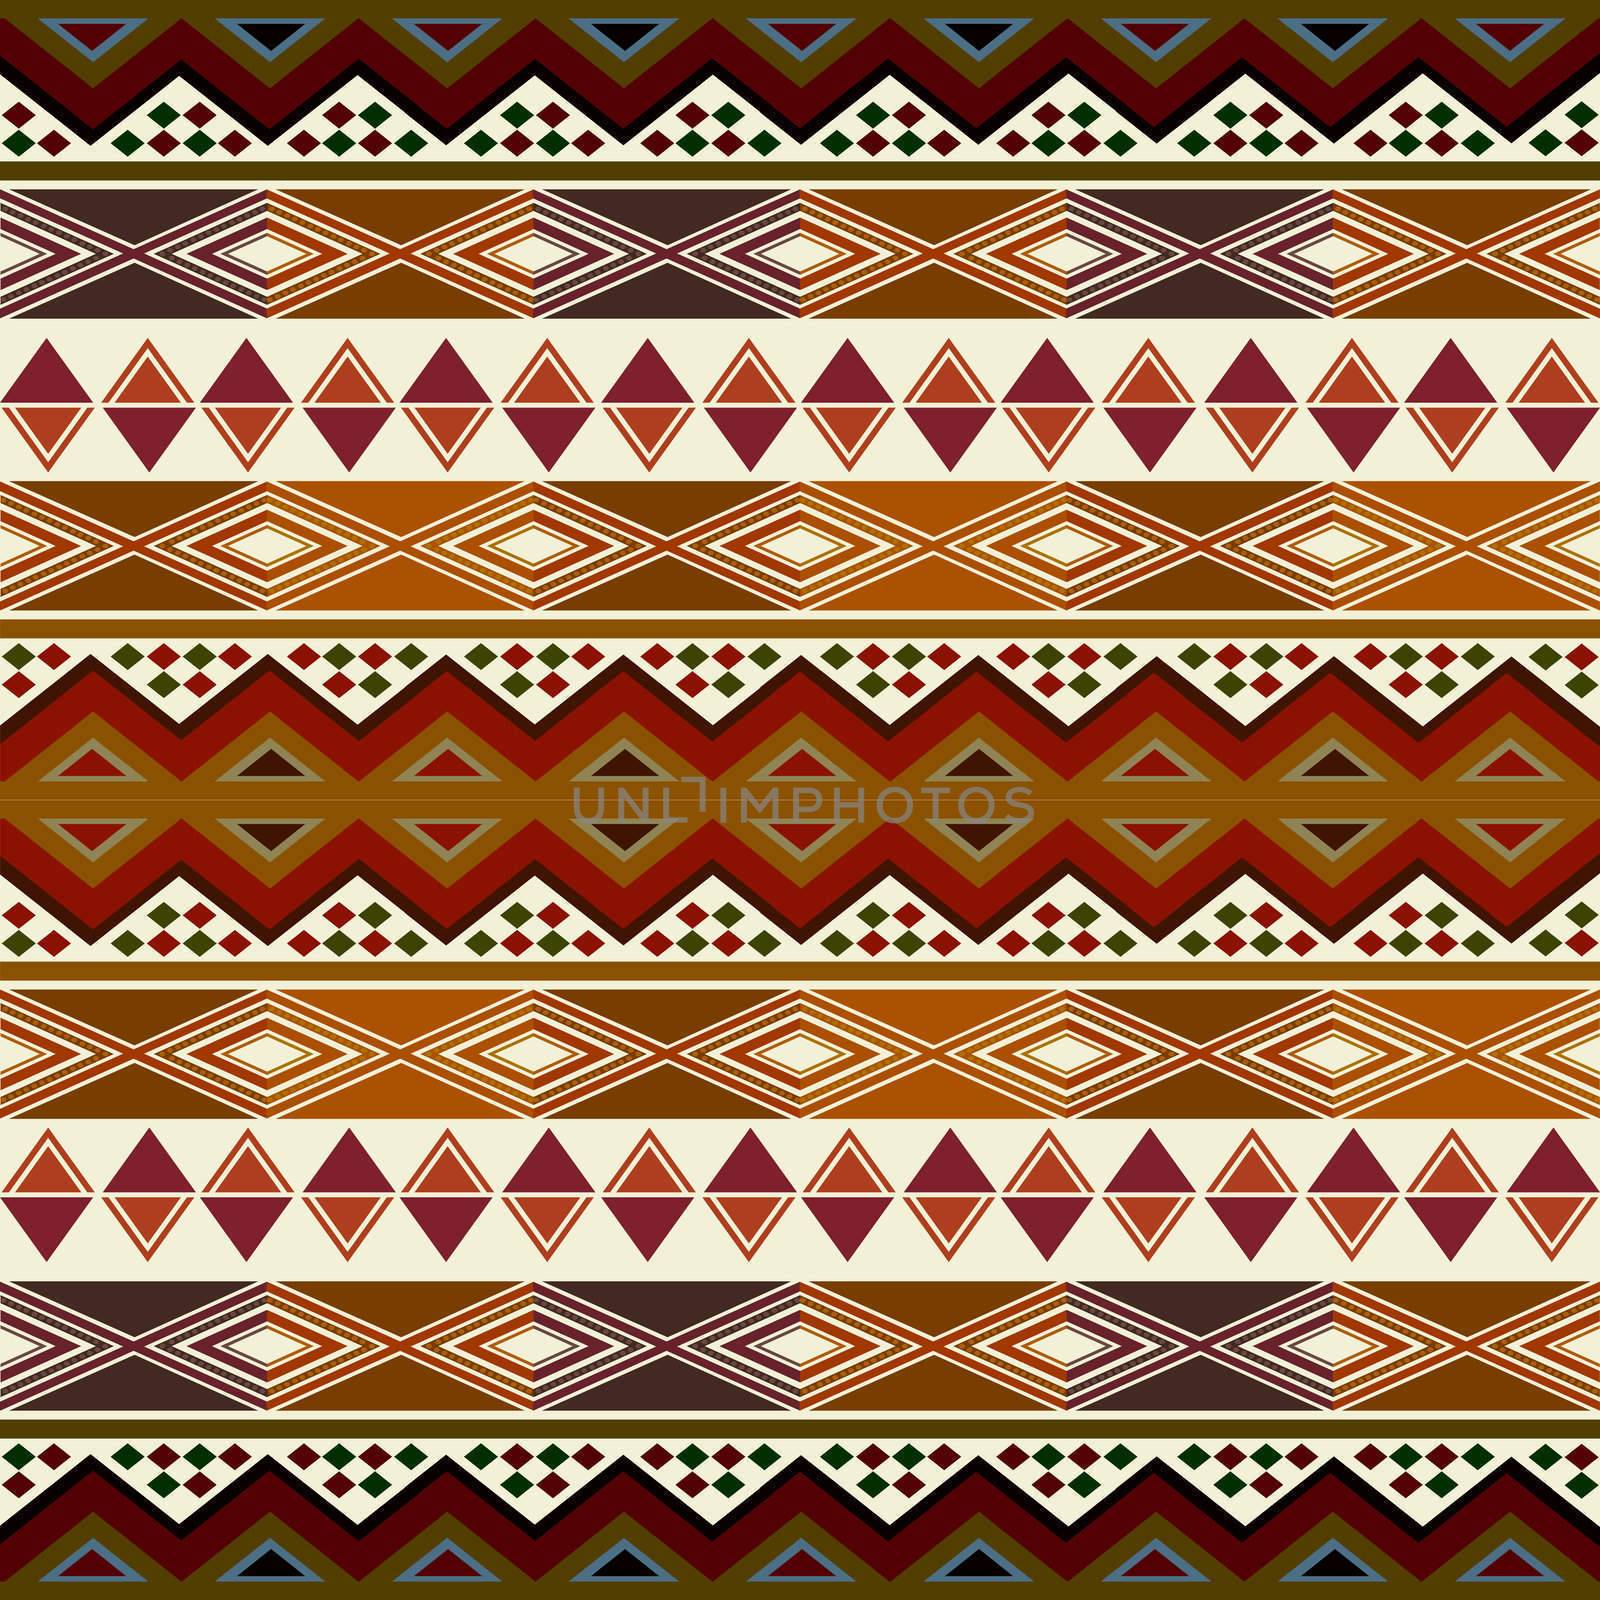 Multicolored african pattern with geometric shapes/symbols